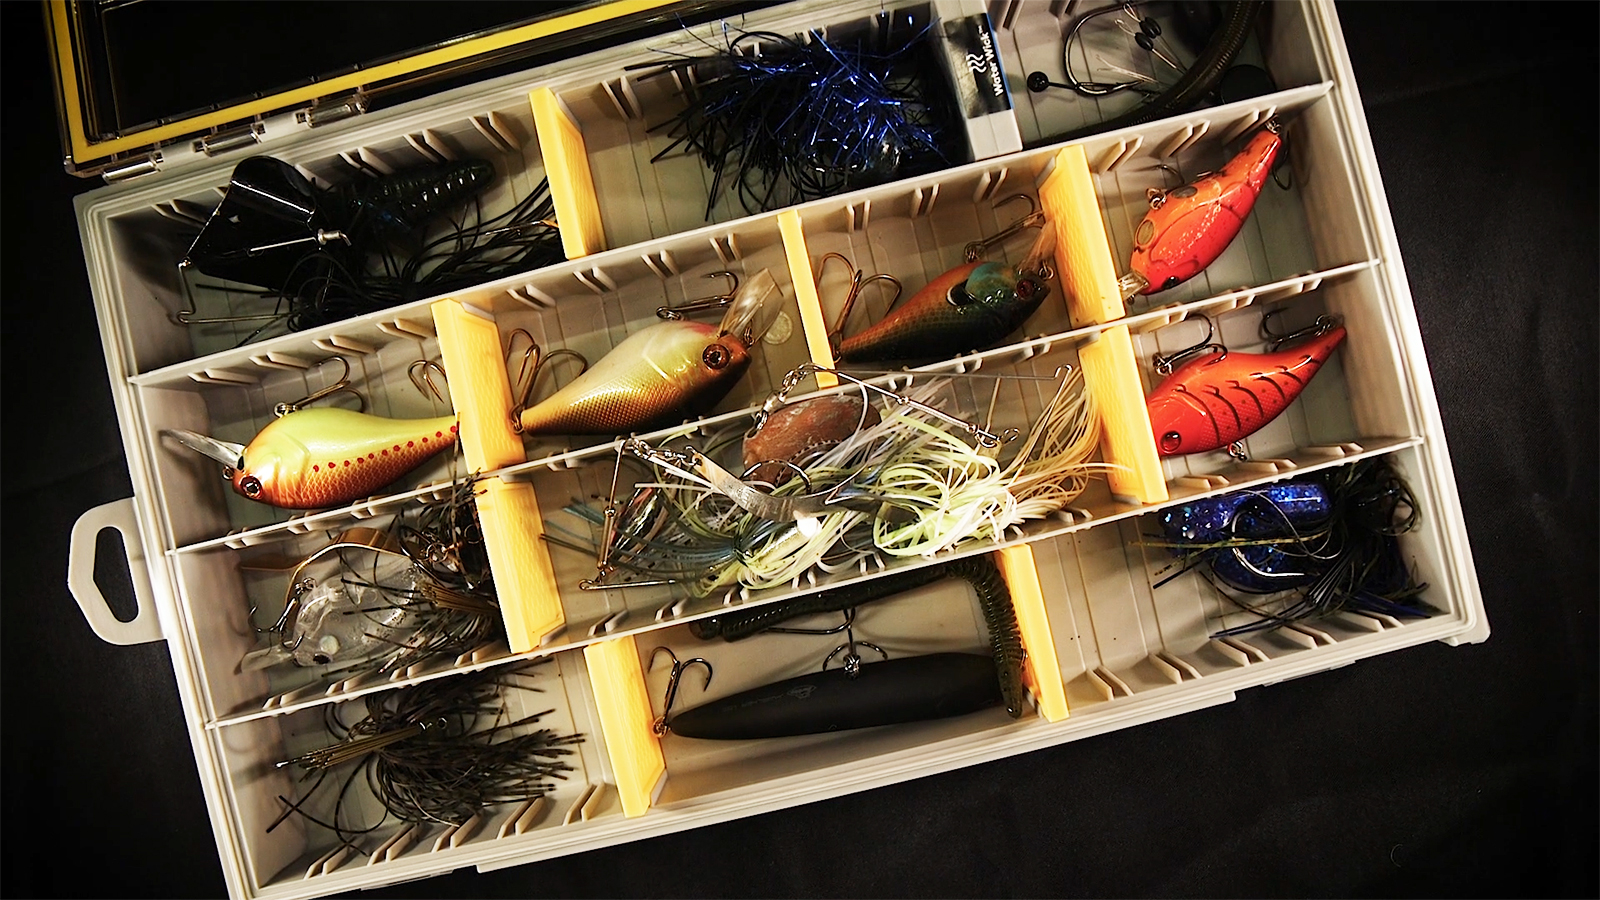 Plano Whose Tackle Box is This? Lake Travis Edition - Major League